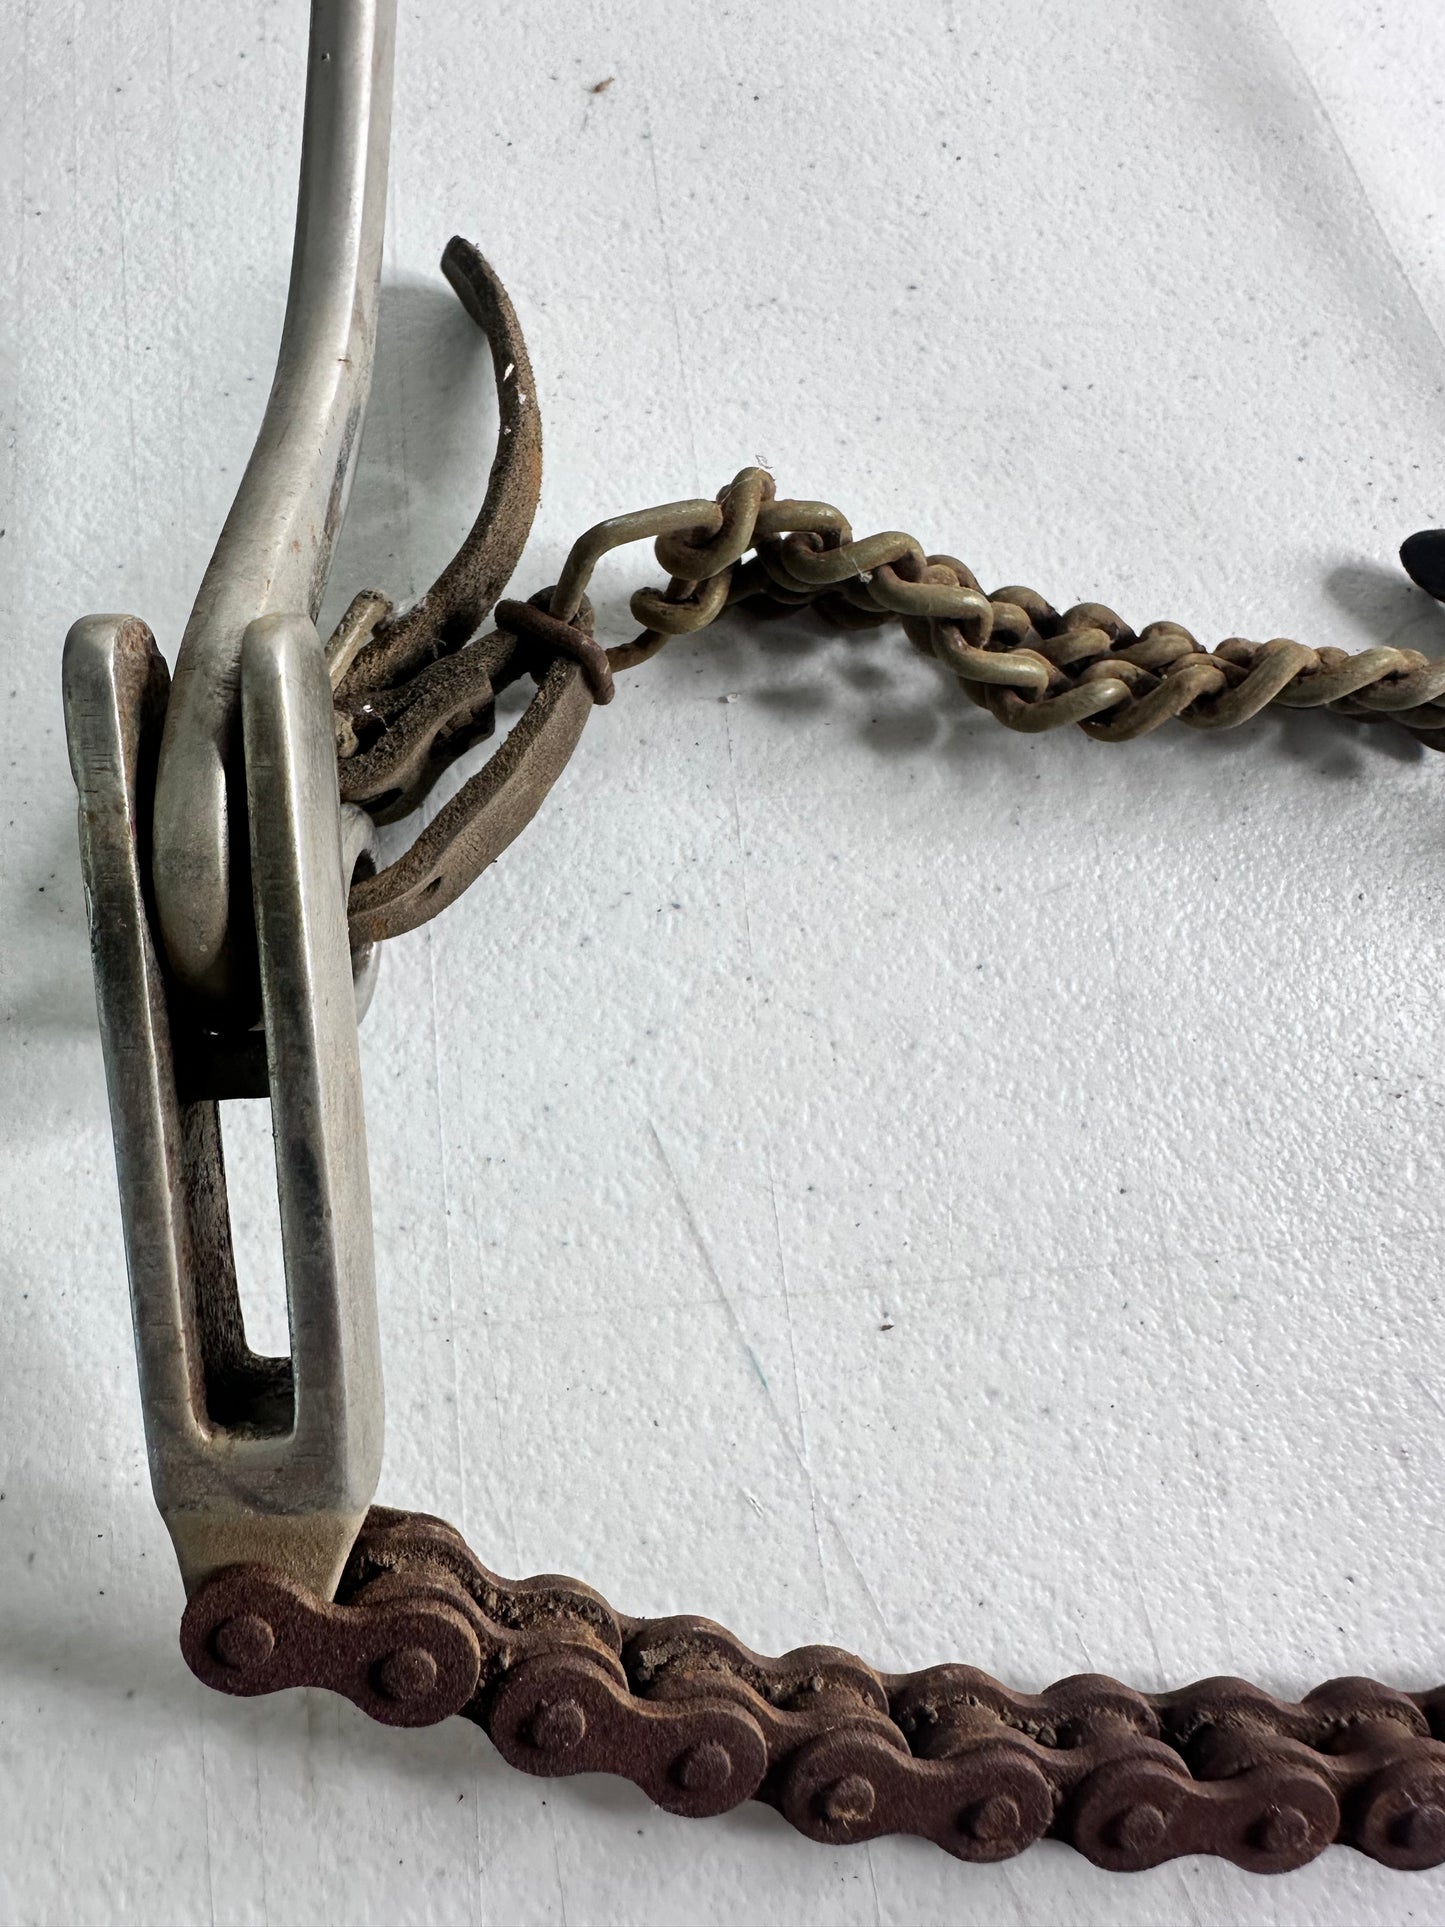 Vintage Spade Bit Horse Bit with Rusty Chain and Worn Leather Straps - Collectible